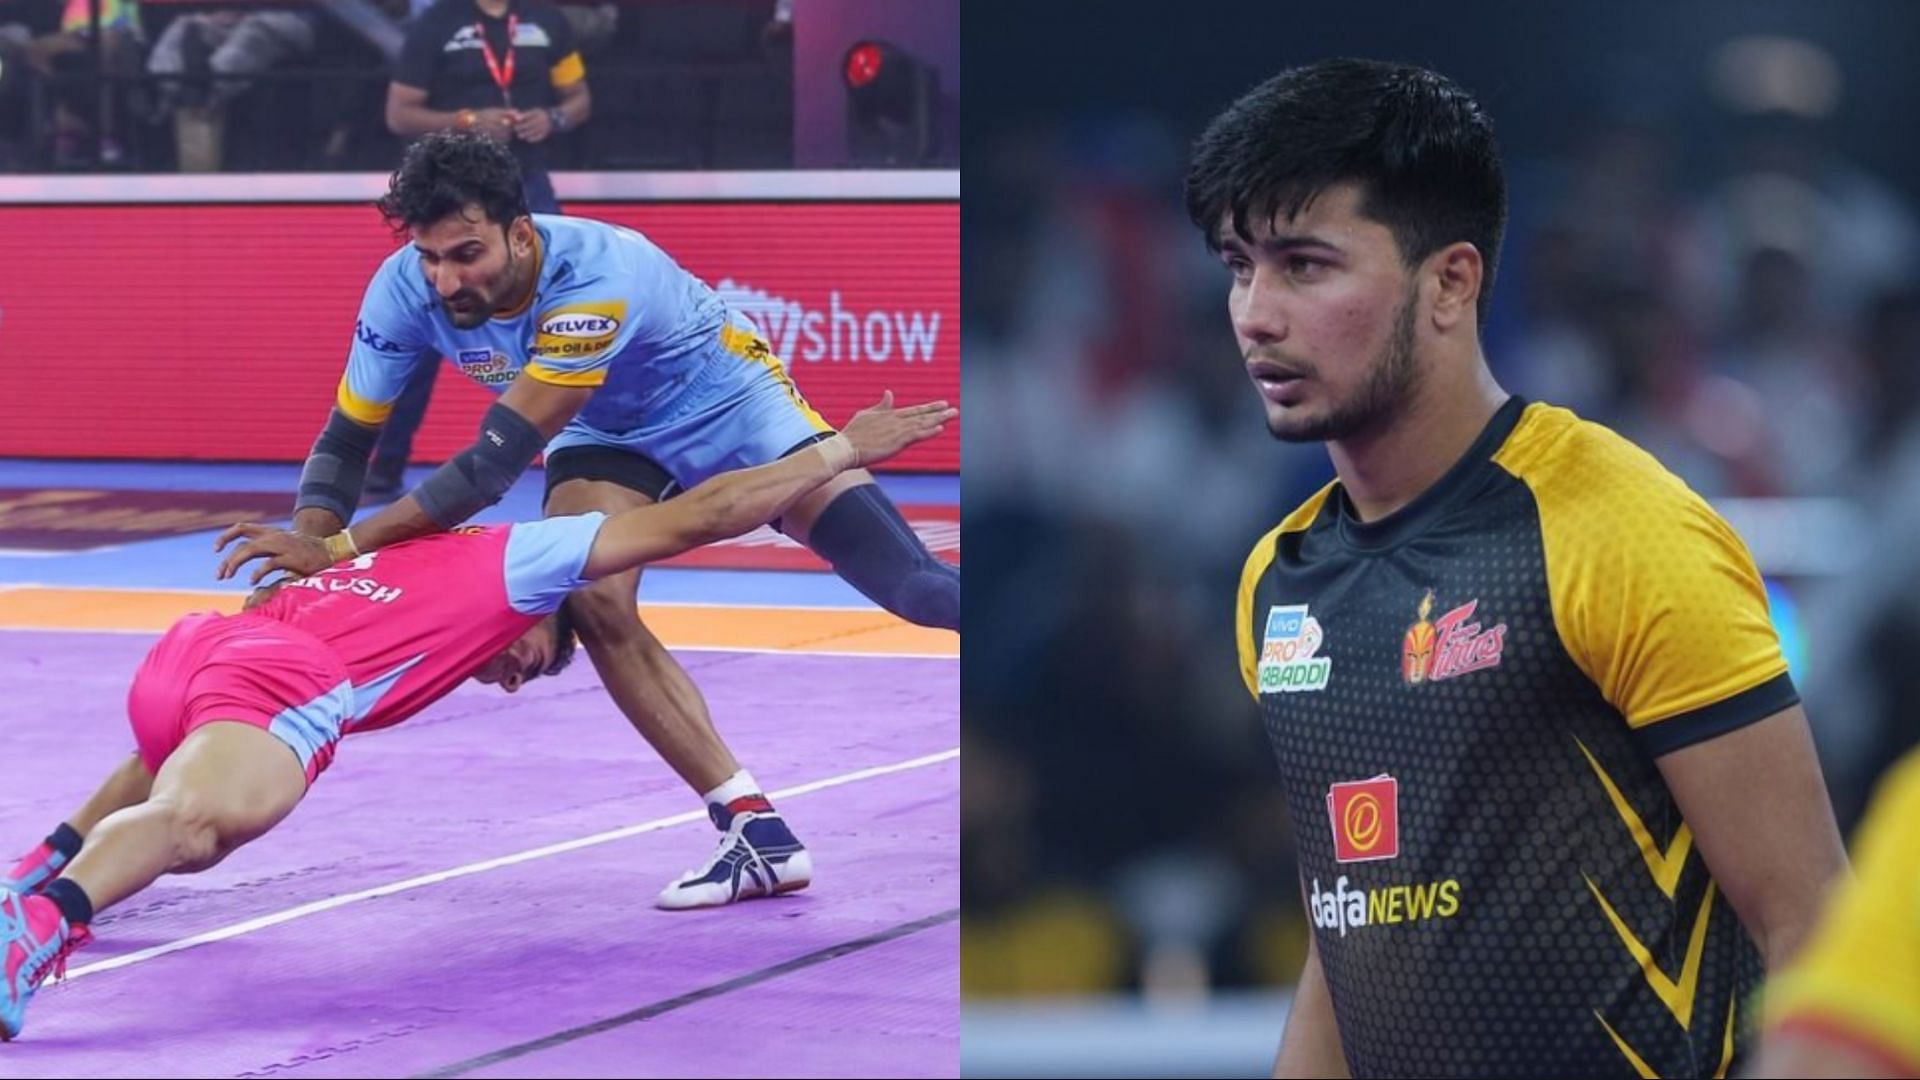 Ankush Rathee and Vinay started their Pro Kabaddi careers in the previous week (Image: Instagram)